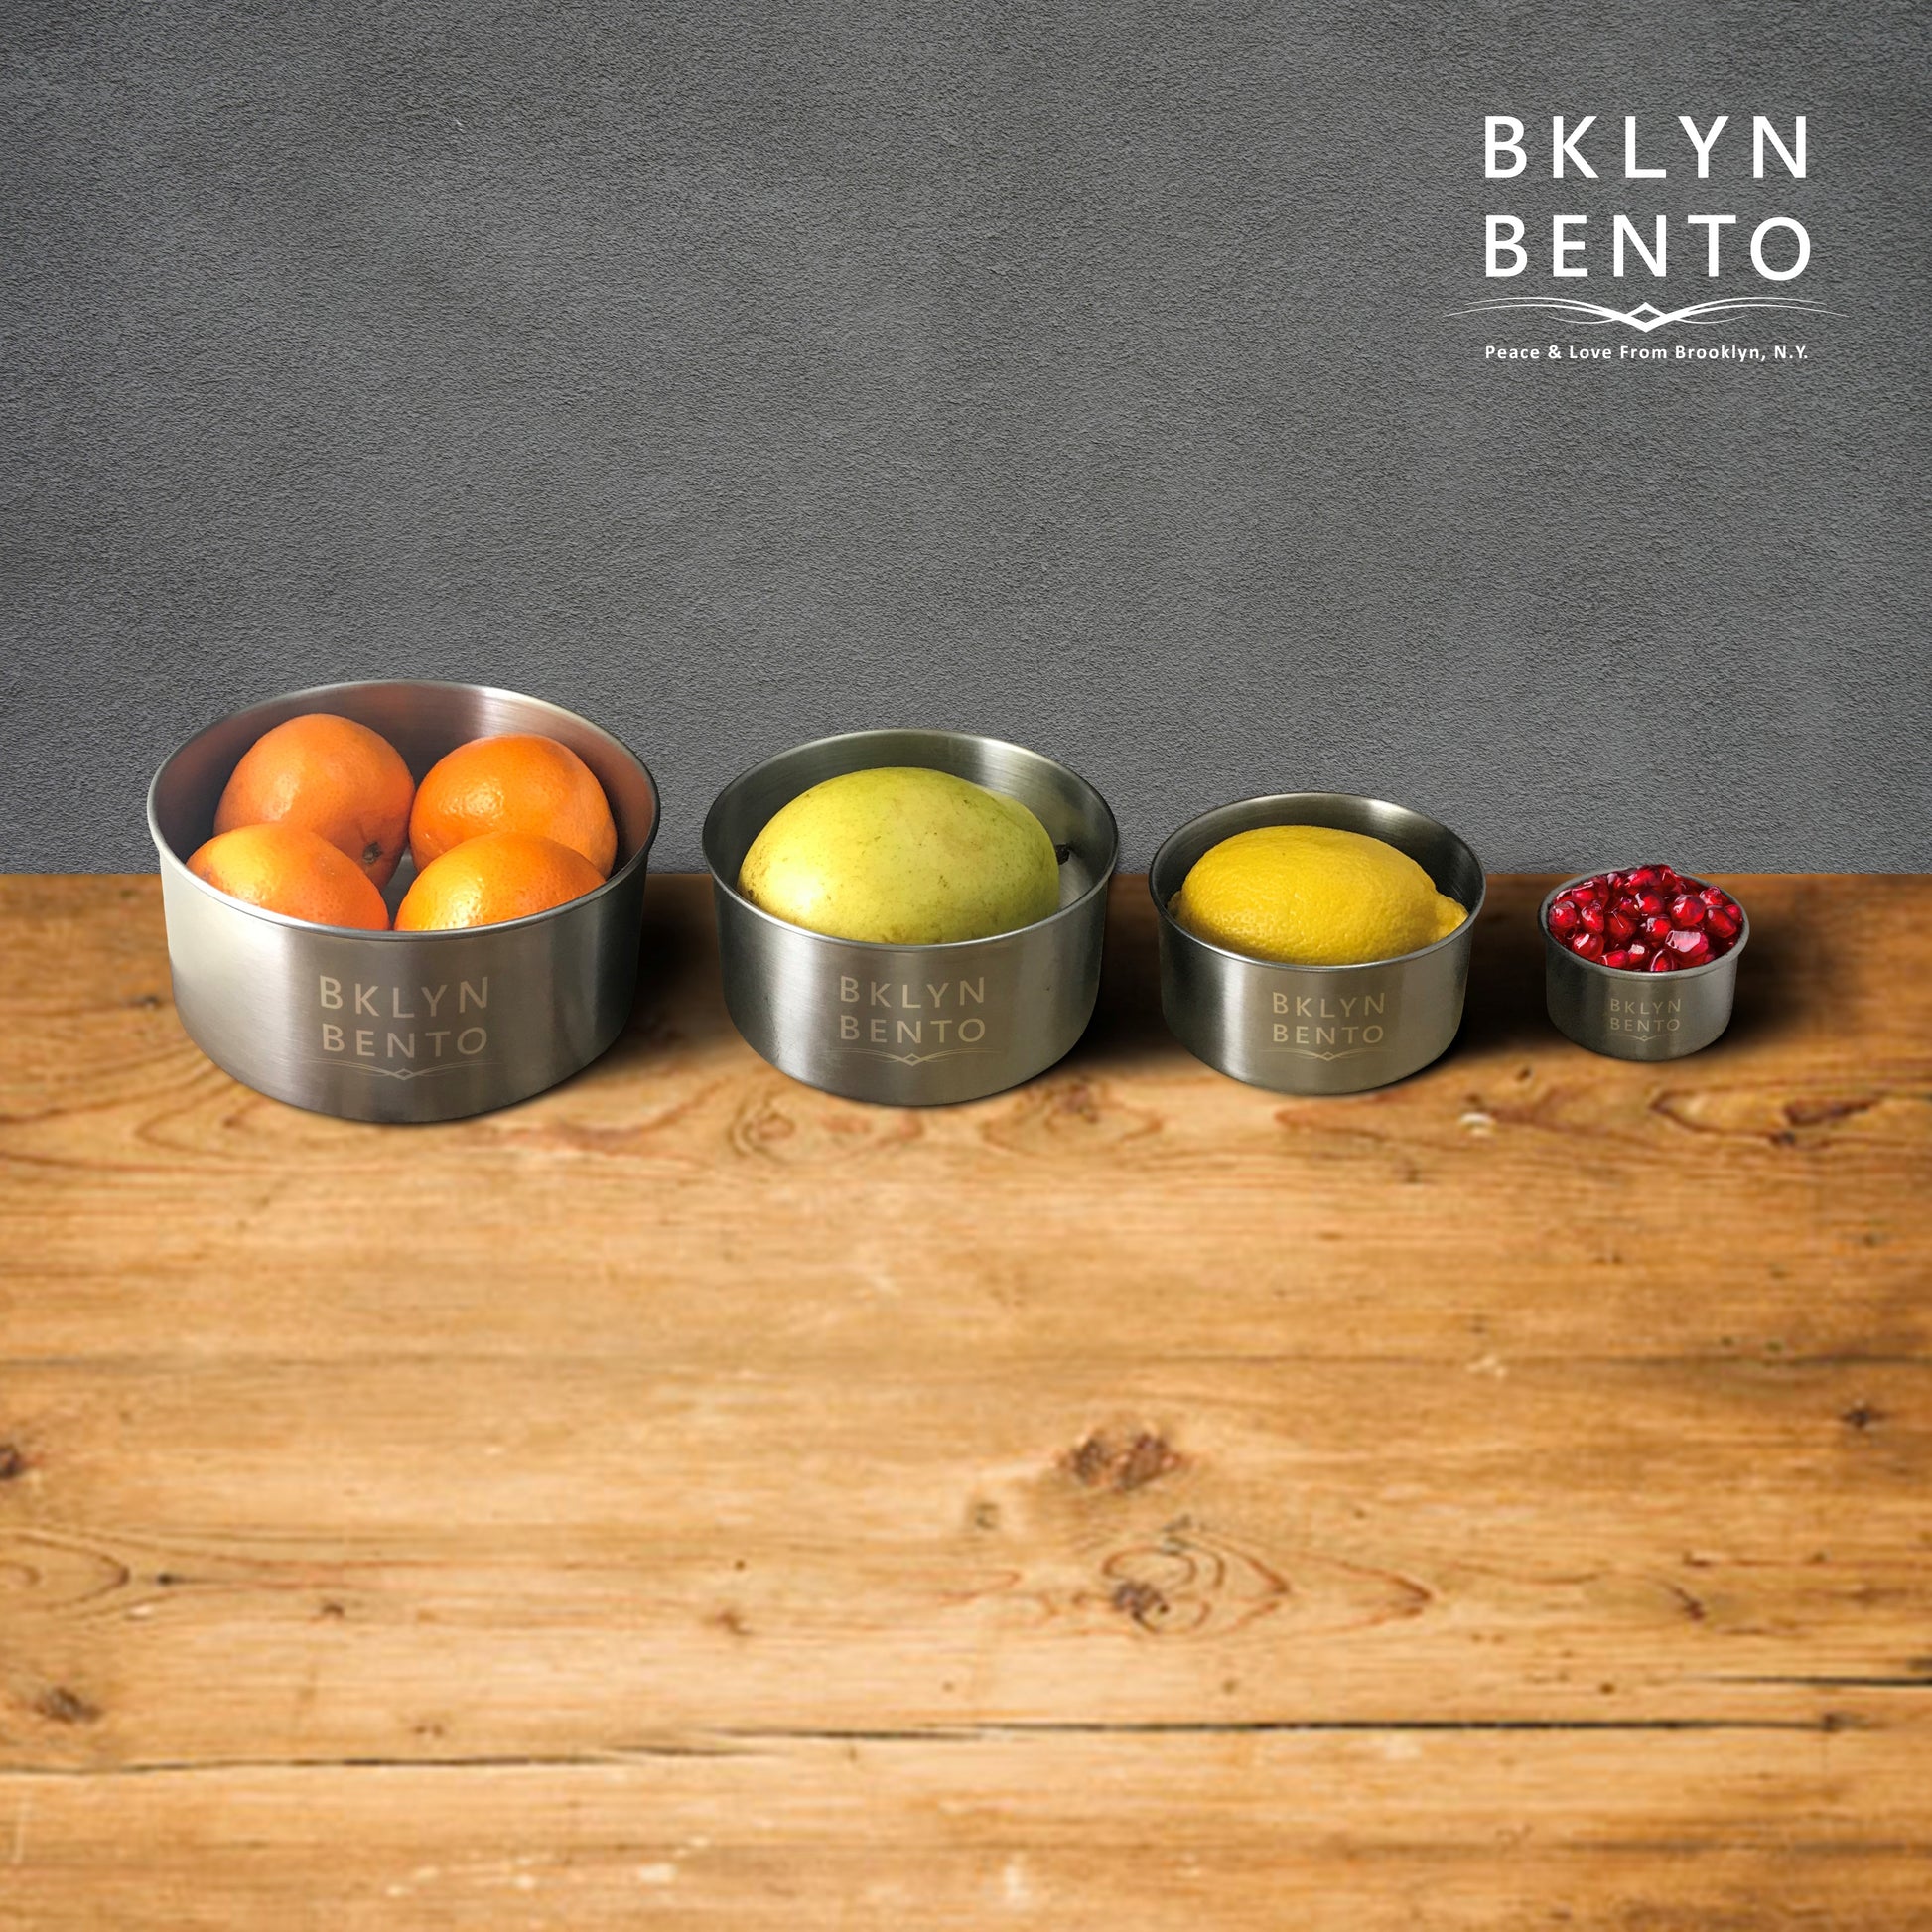 Bklyn Bento Small Stainless Steel 3 Piece Condiment Set